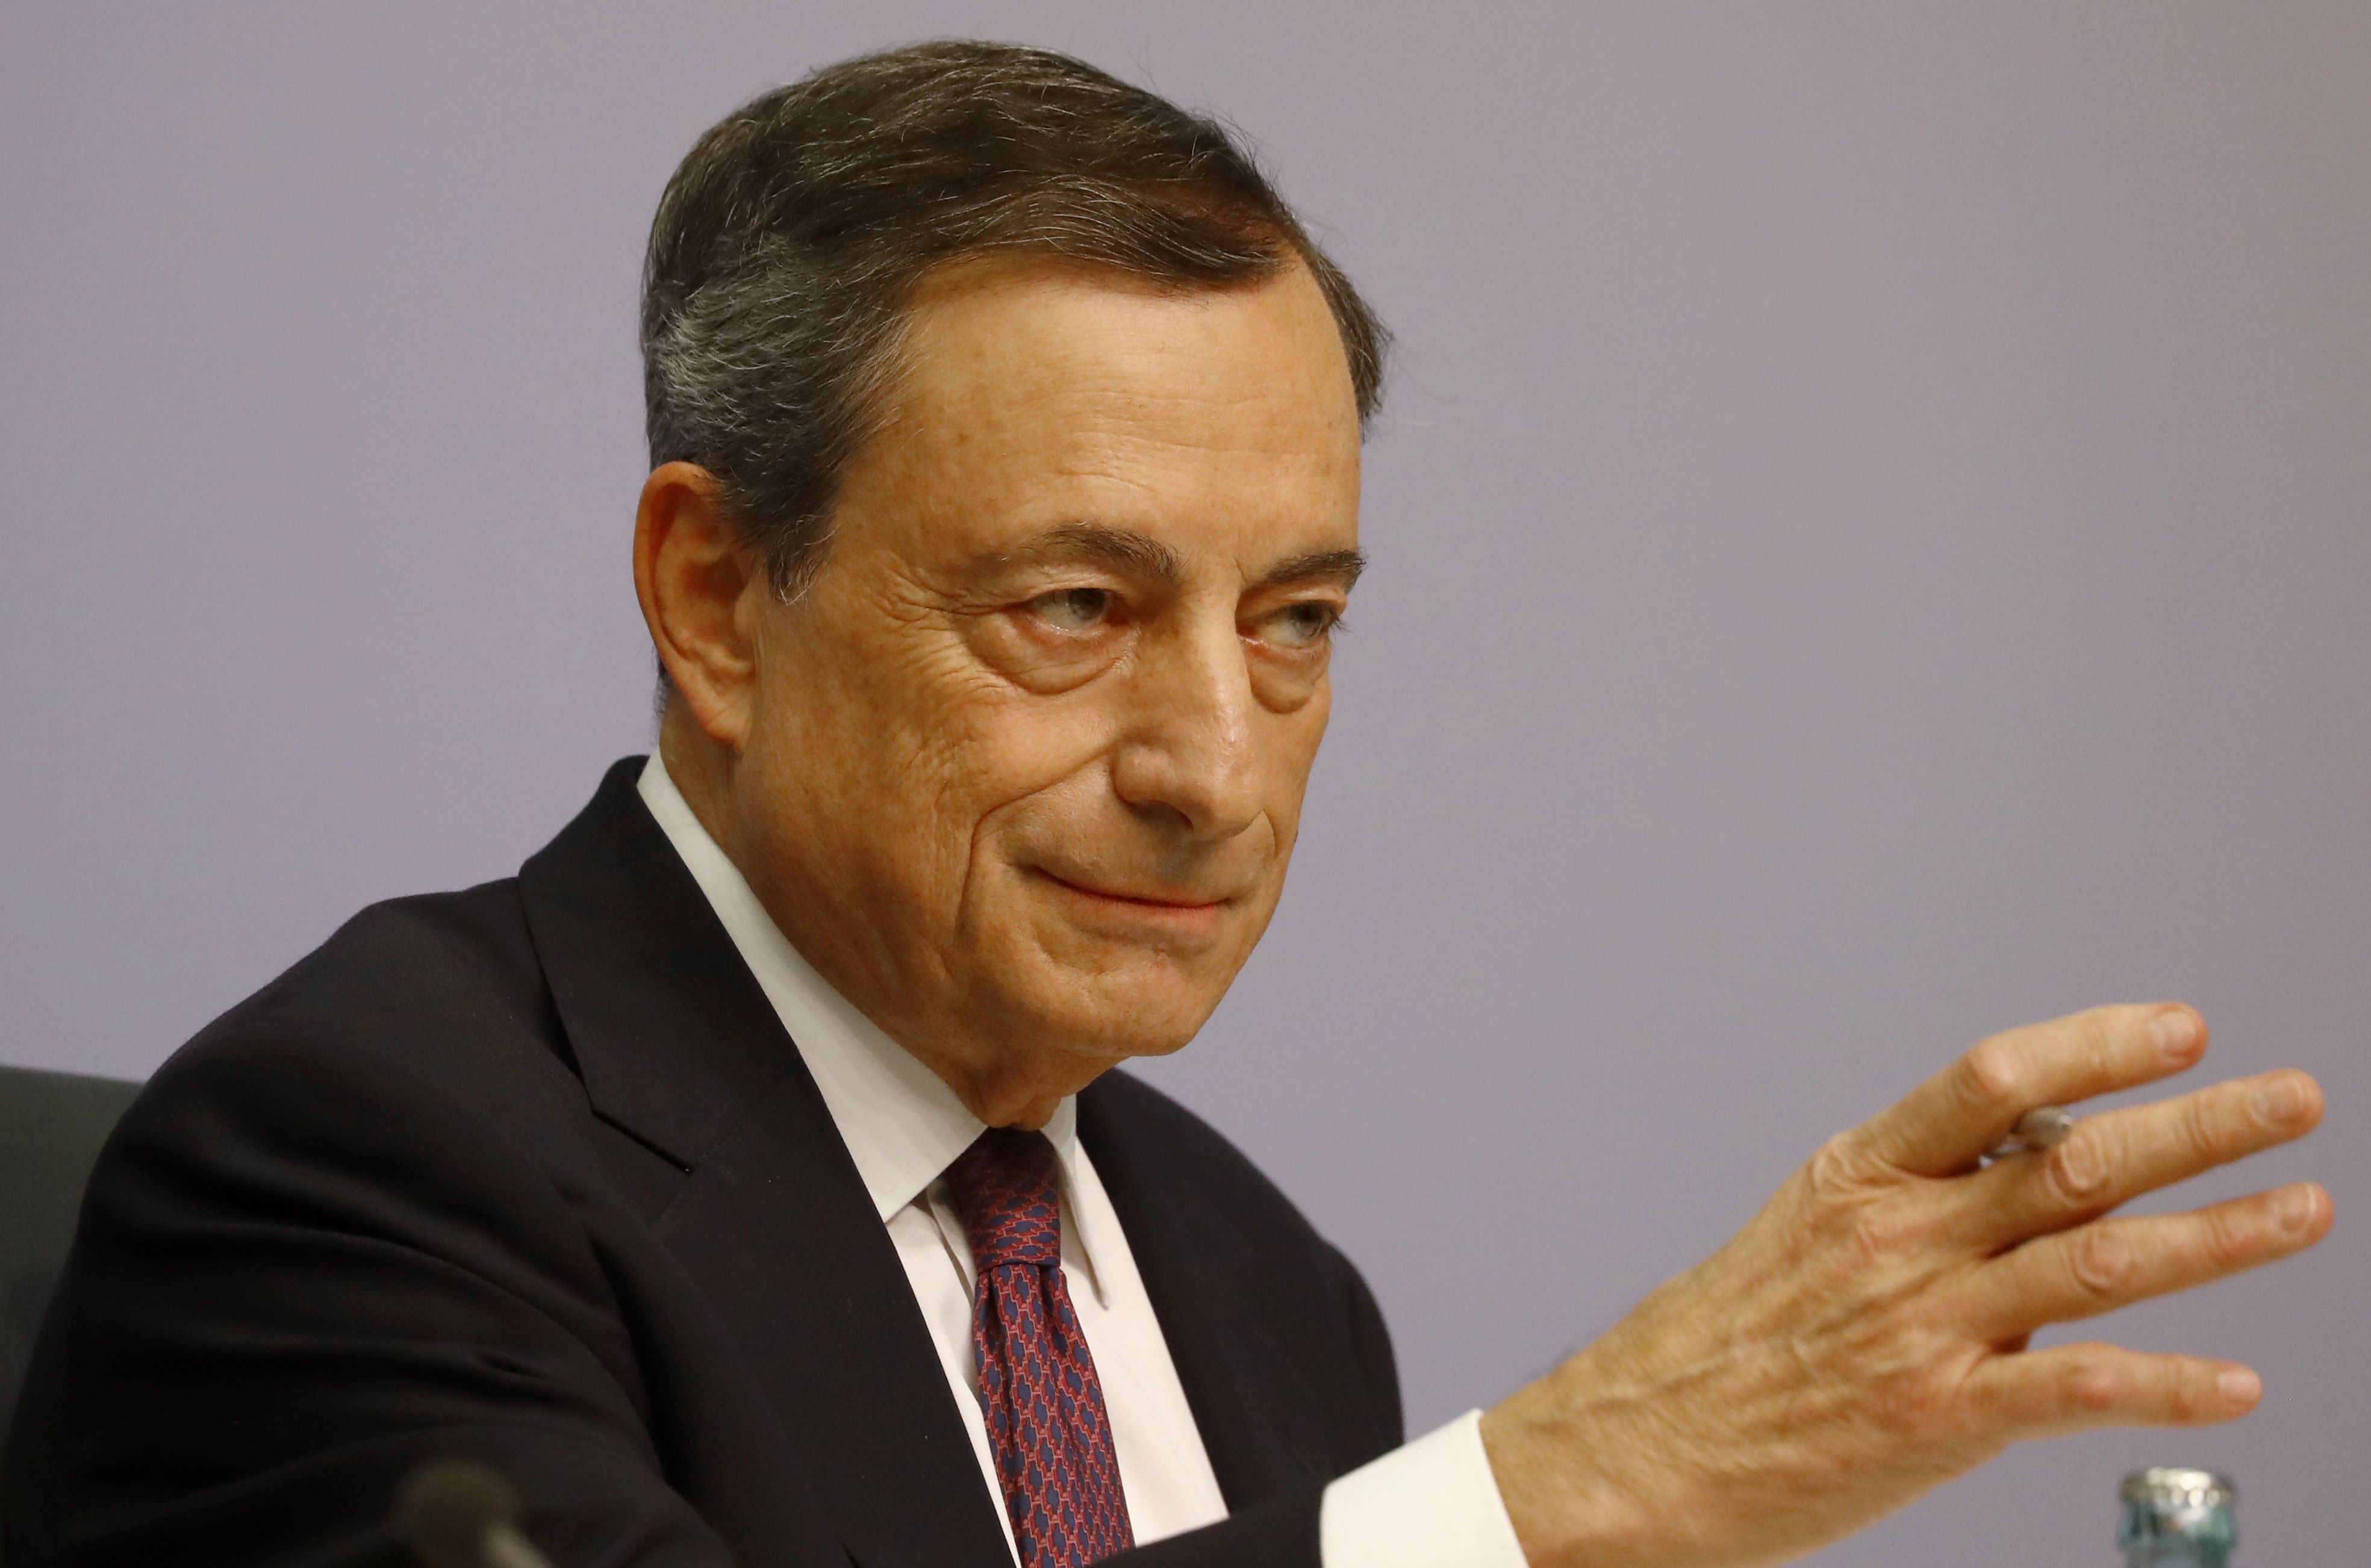 Draghi calls for joint effort on non-performing loans